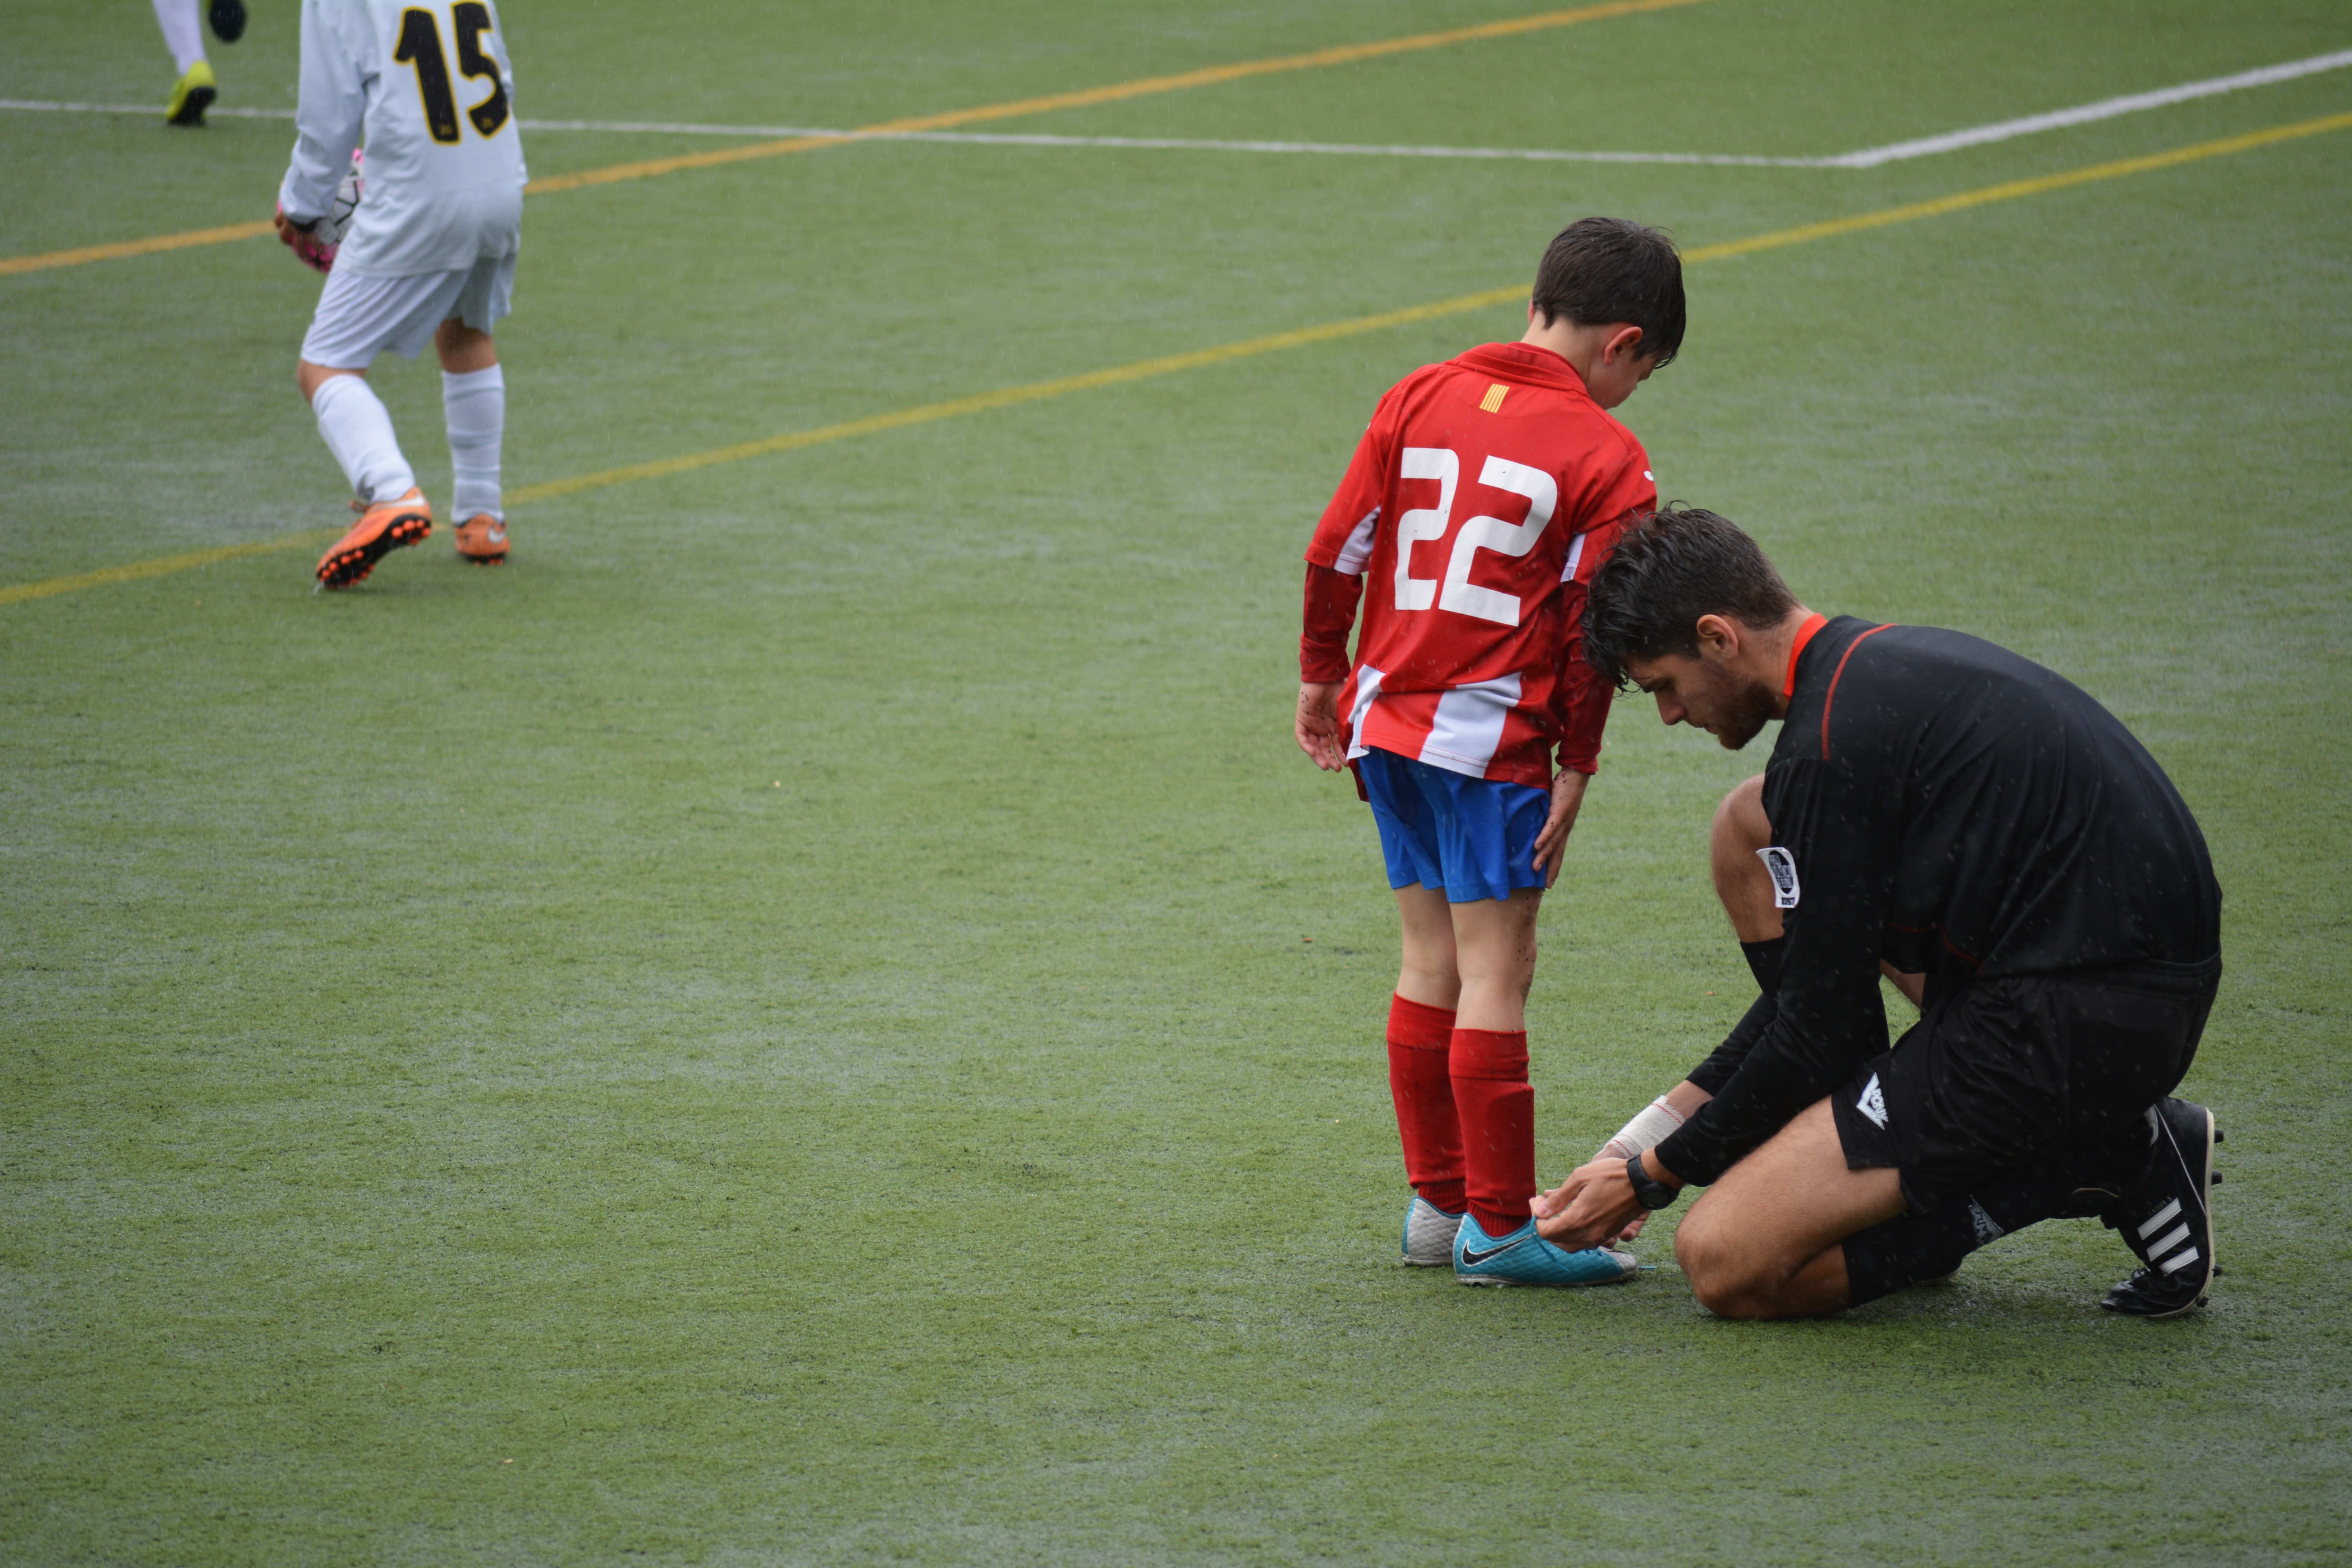 Photo of a soccer coach helping a team member by Adria Crehuet on Unsplash